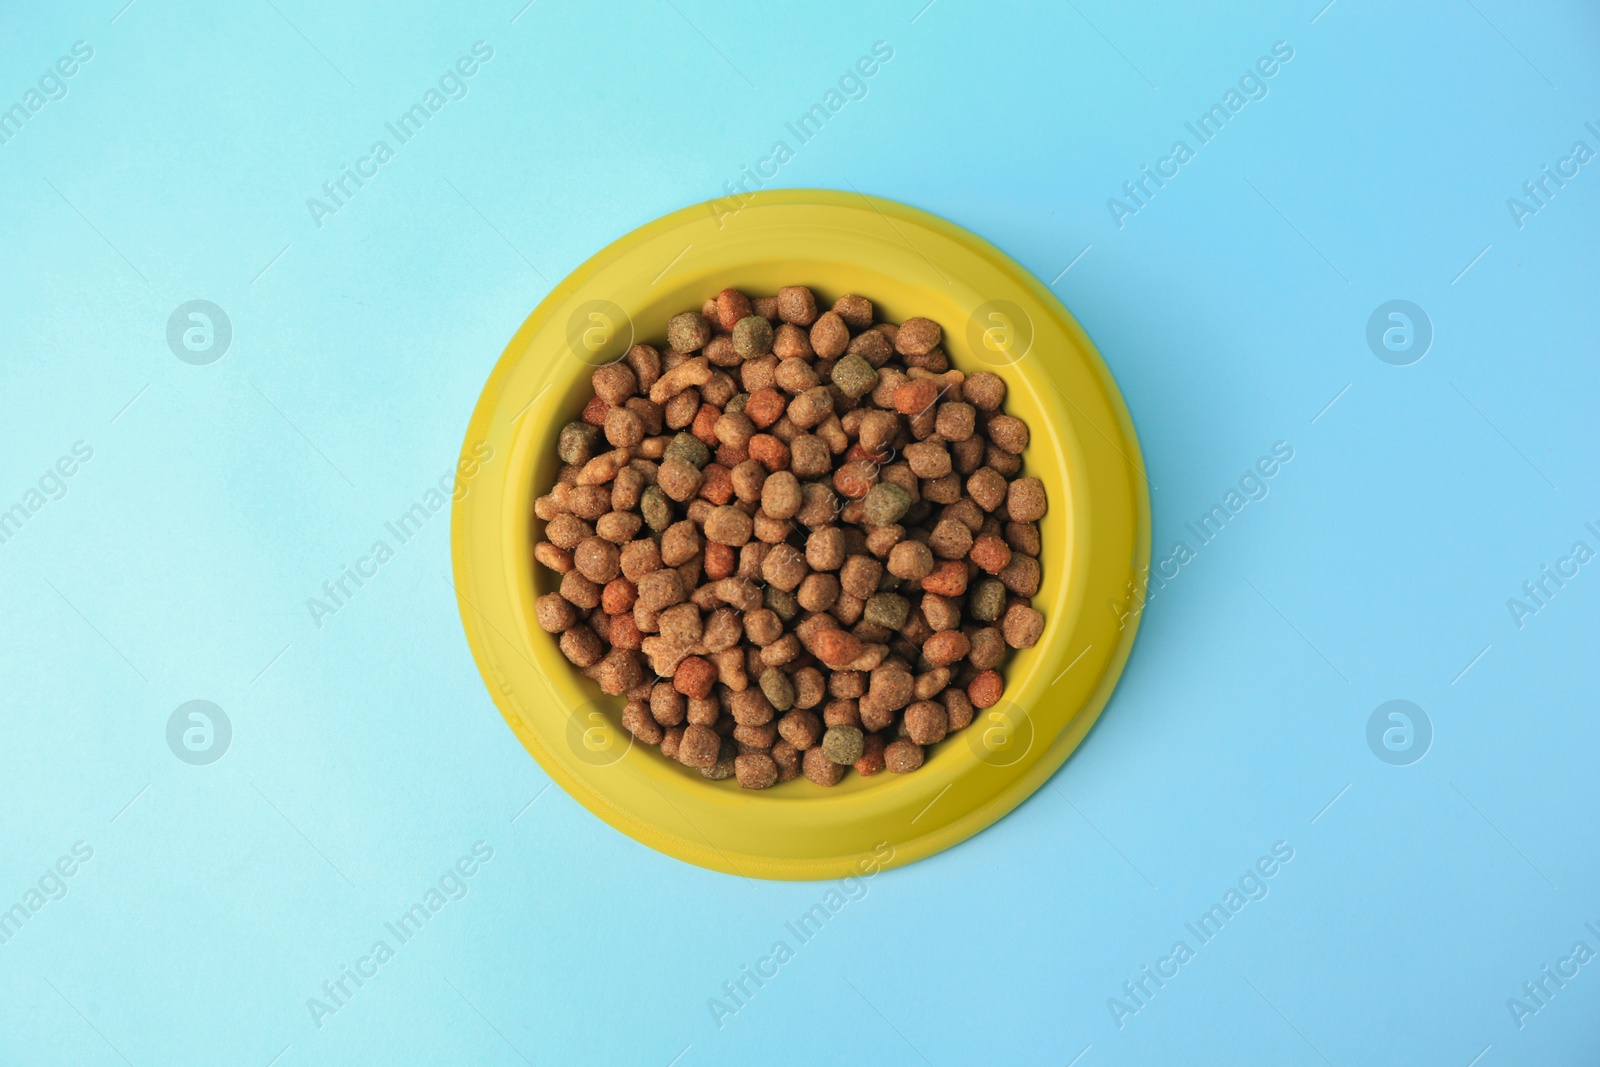 Photo of Dry pet food in feeding bowl on light blue background, top view